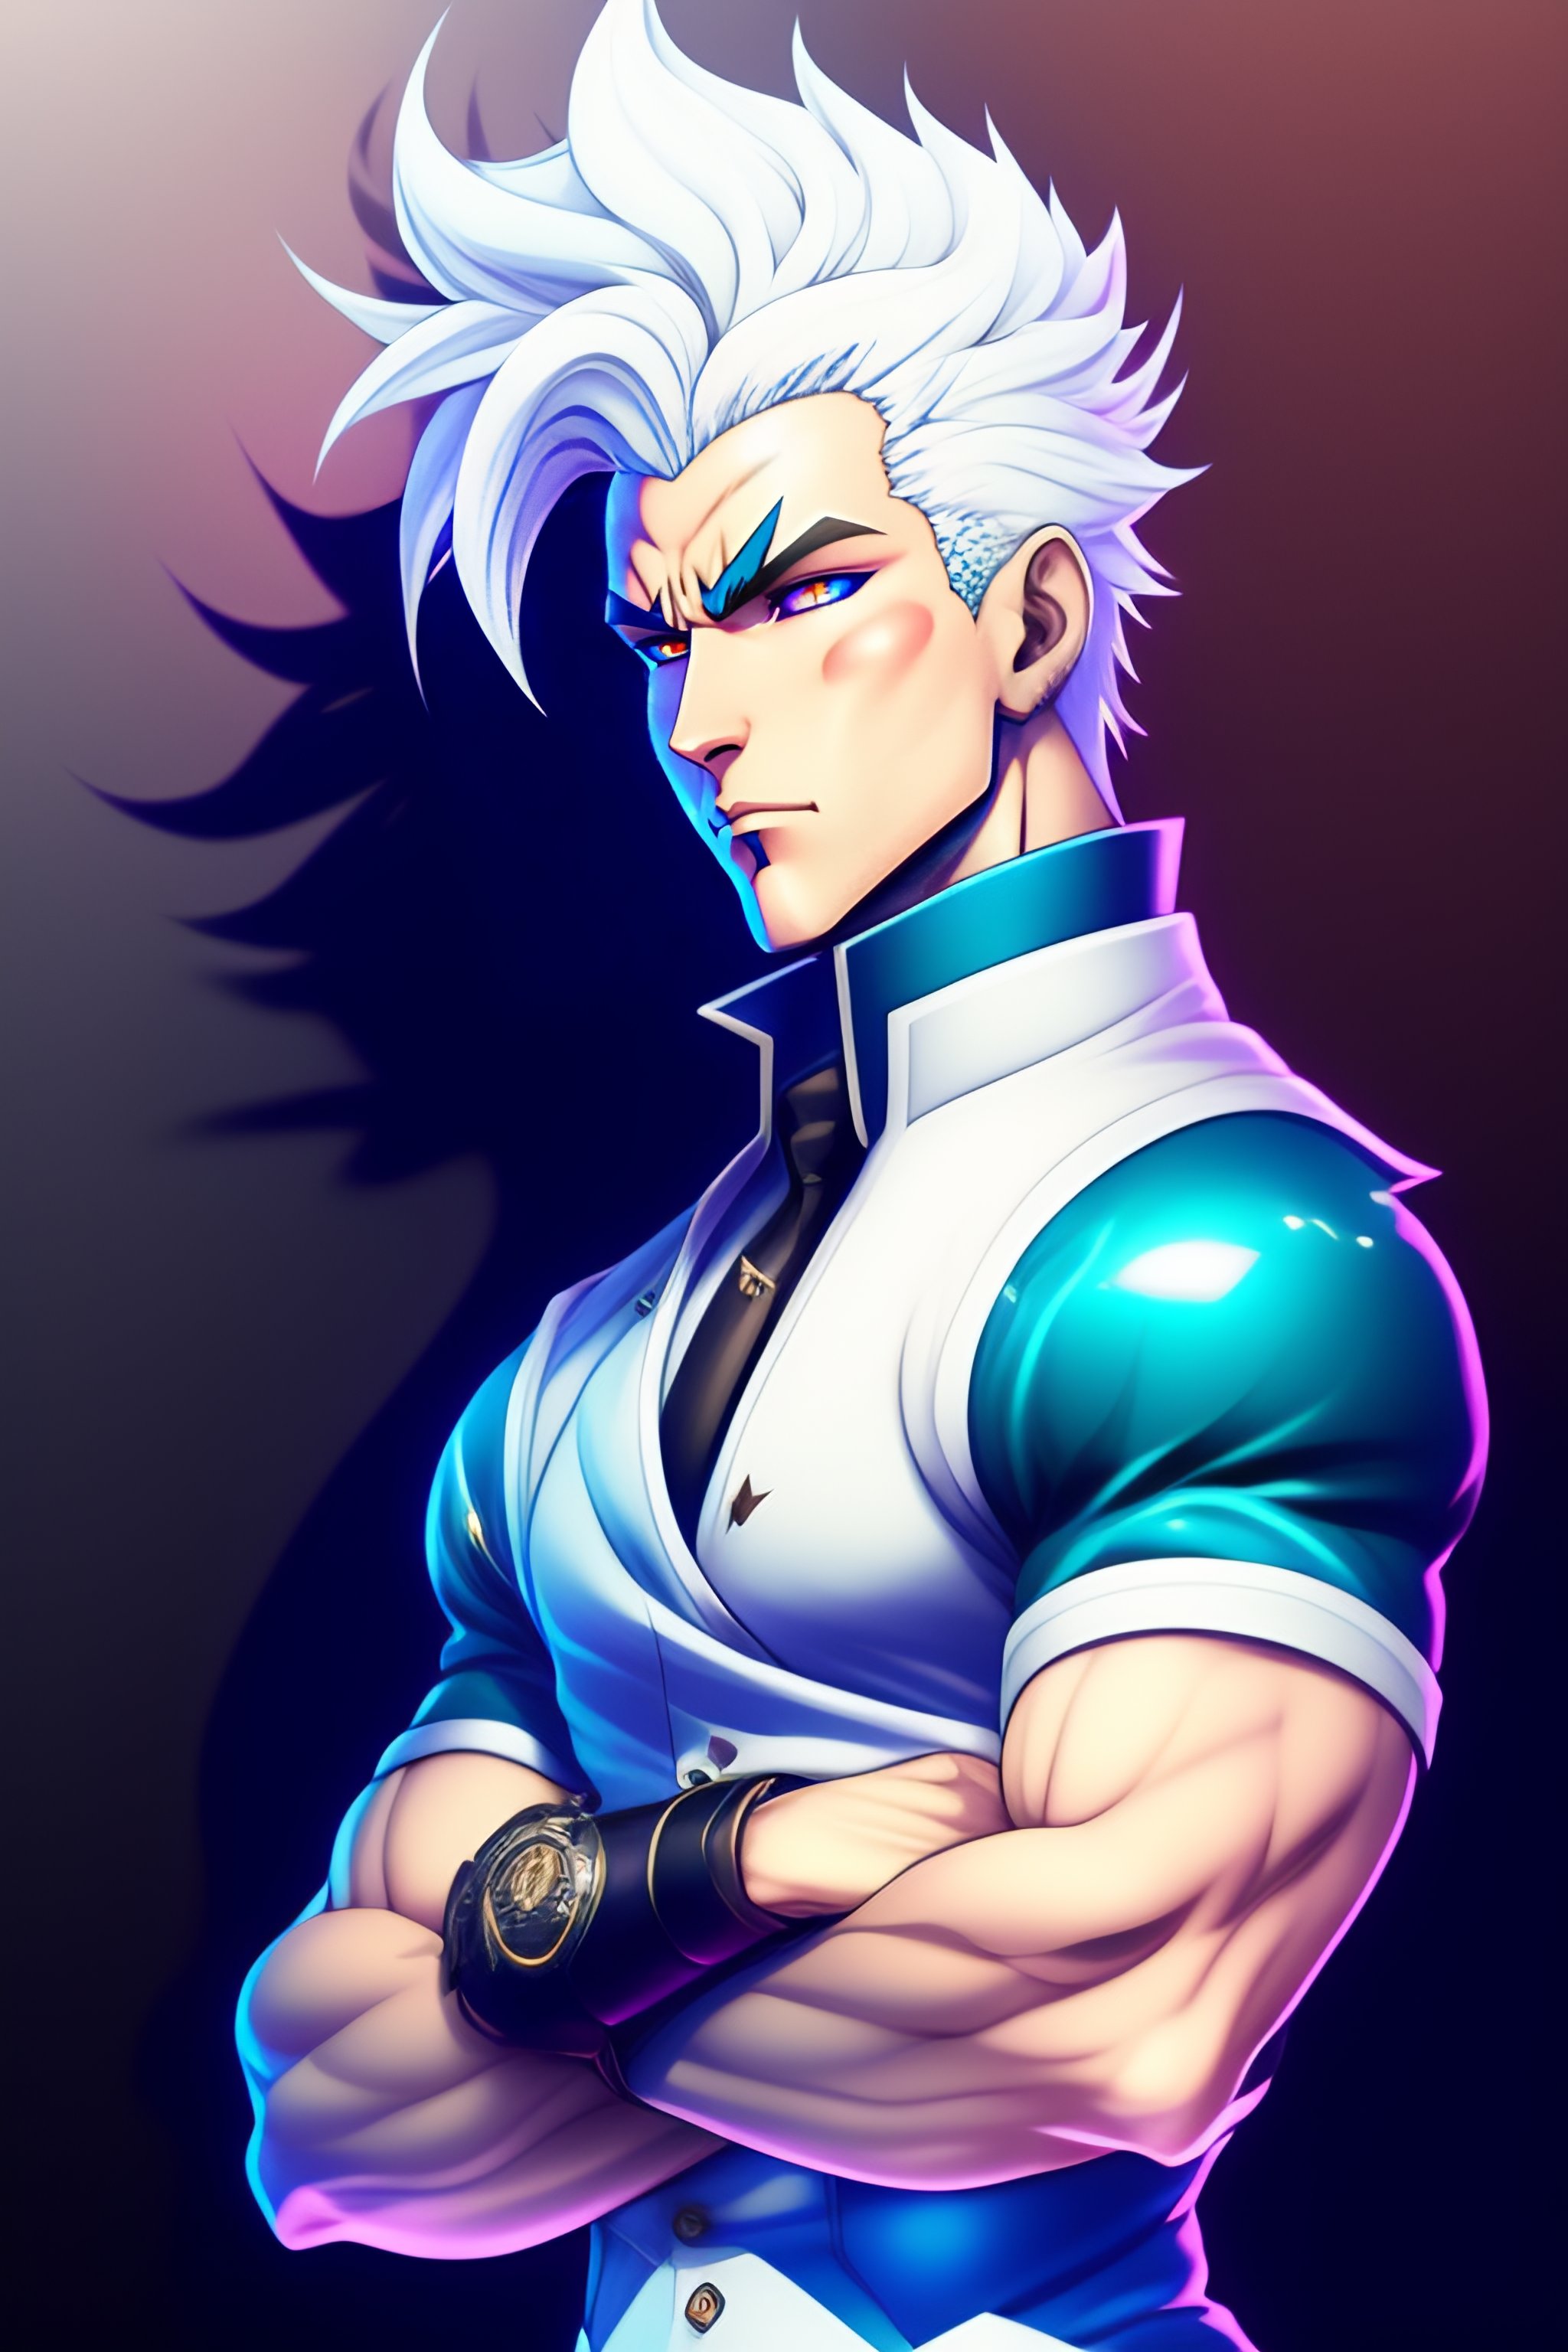 Lexica - White haired man doing a jojo pose with a blue stand